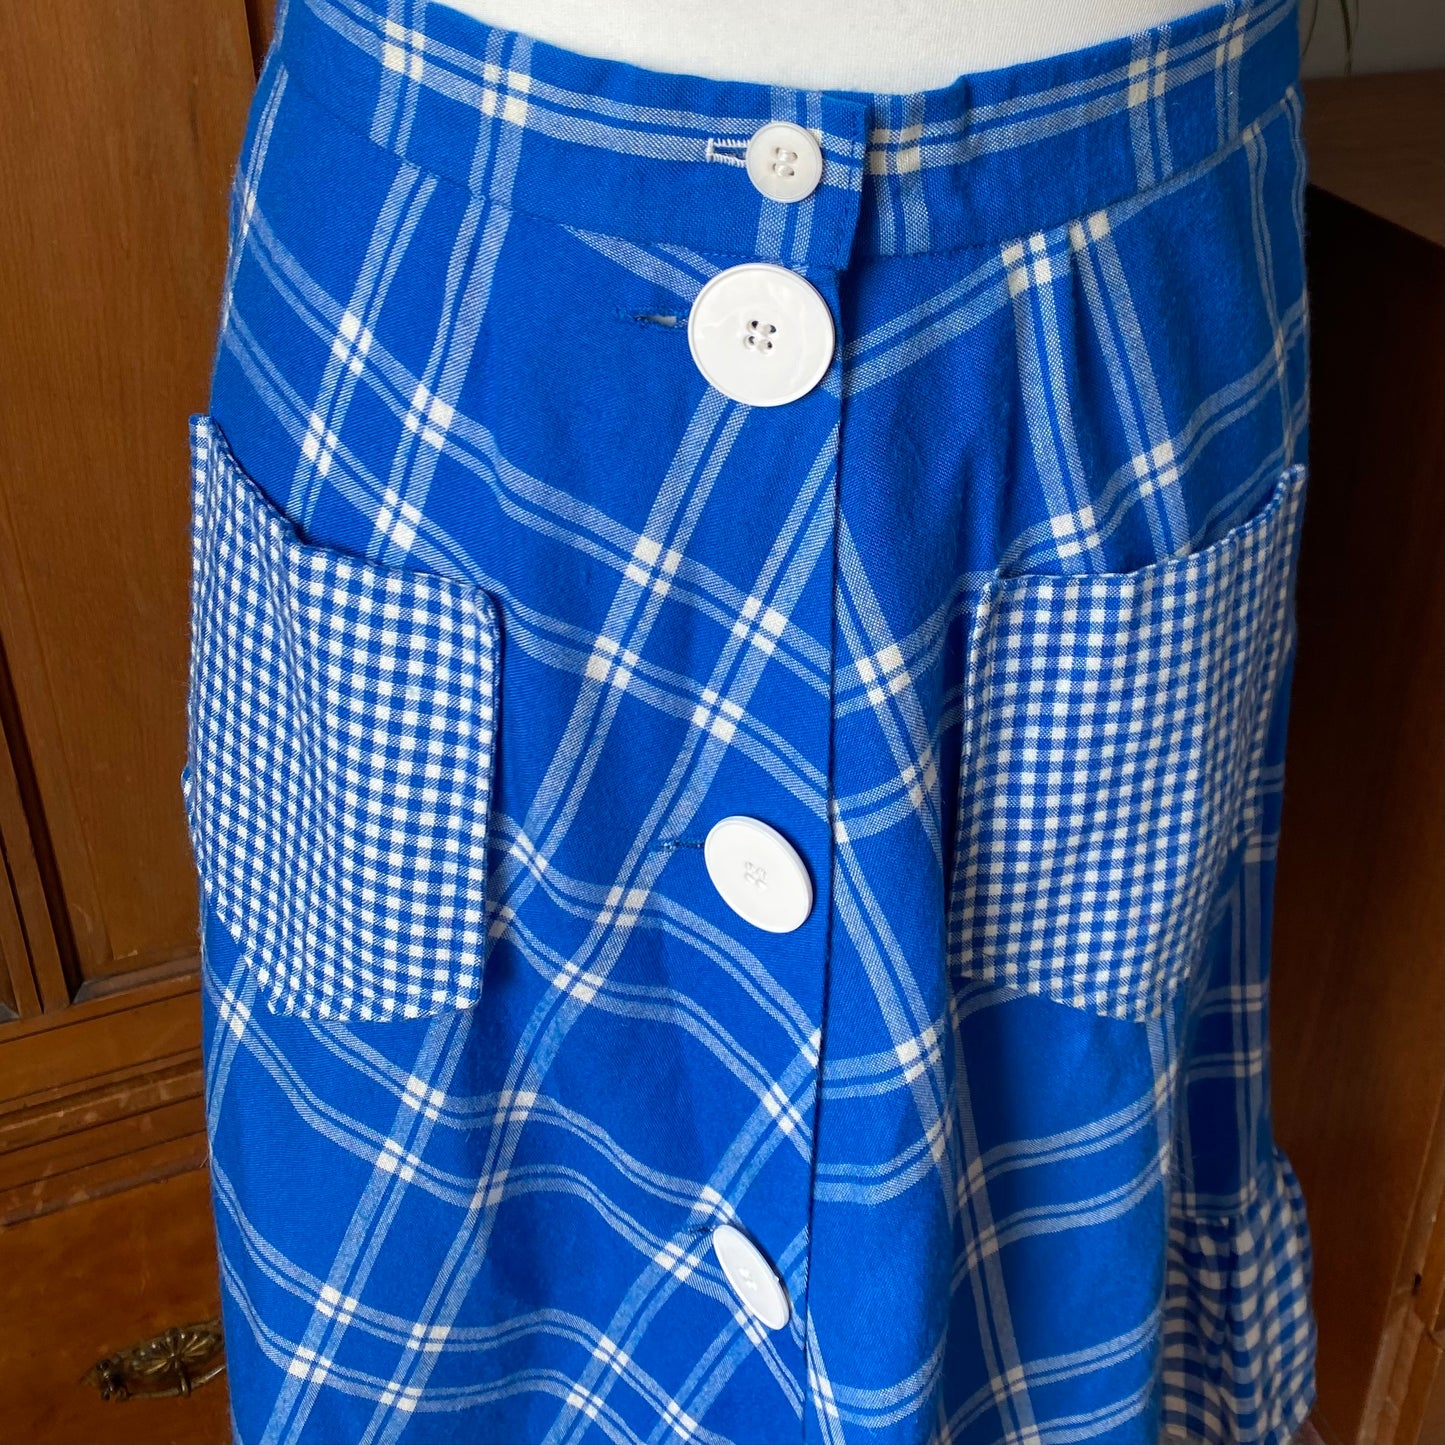 Vintage blue and white rockabilly style button down checked skirt. Approx UK size 18